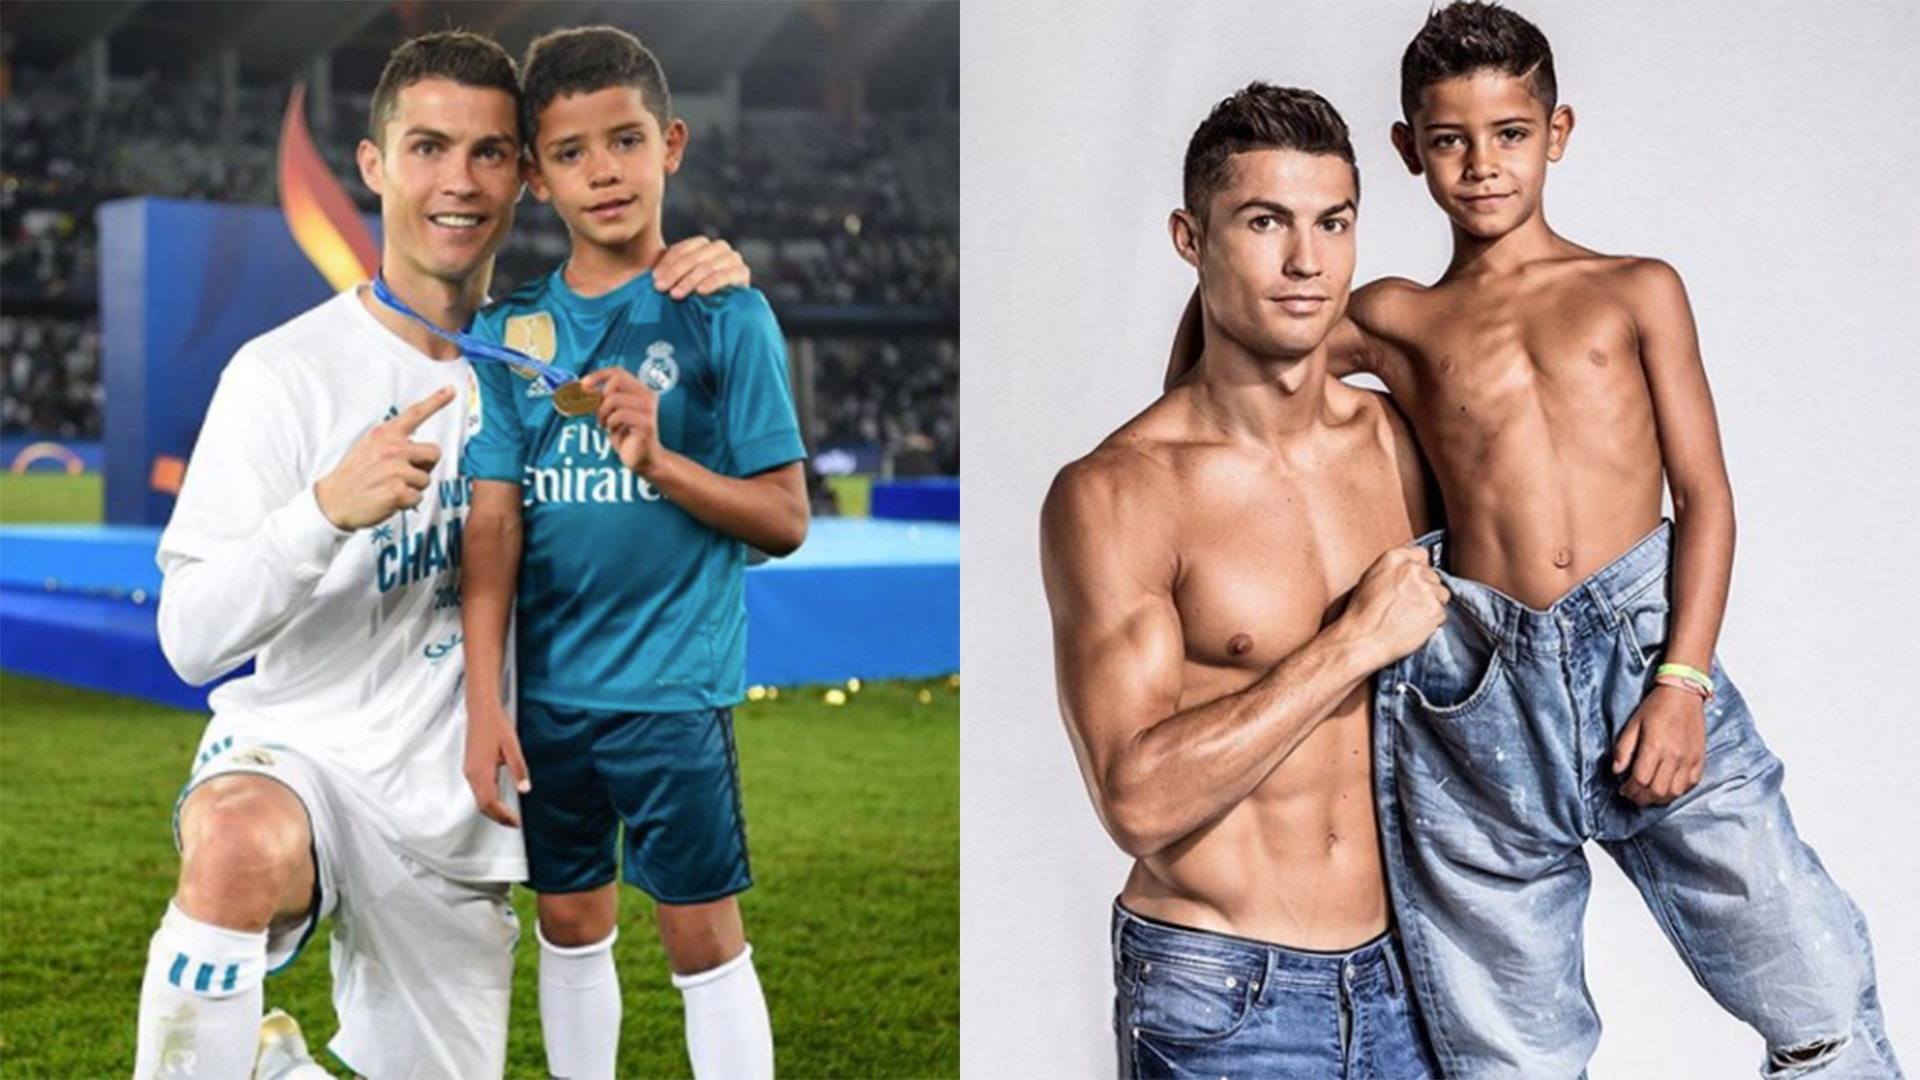 Cristiano Ronaldo and His Son Cristiano Jr. Are About to Take Over the